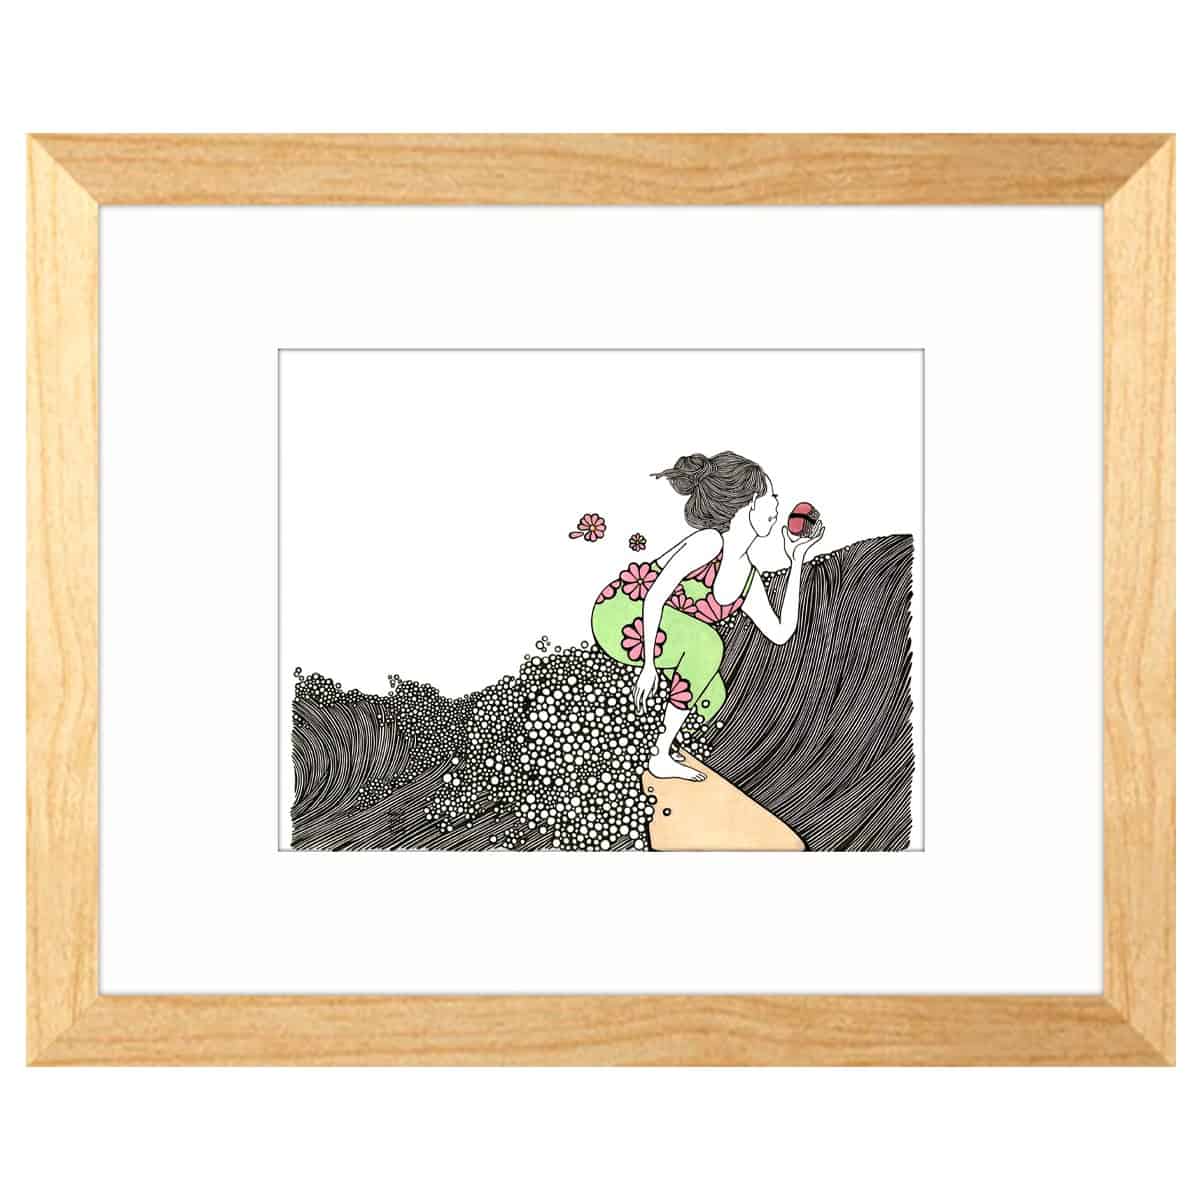 kris goto hungry wooden frame